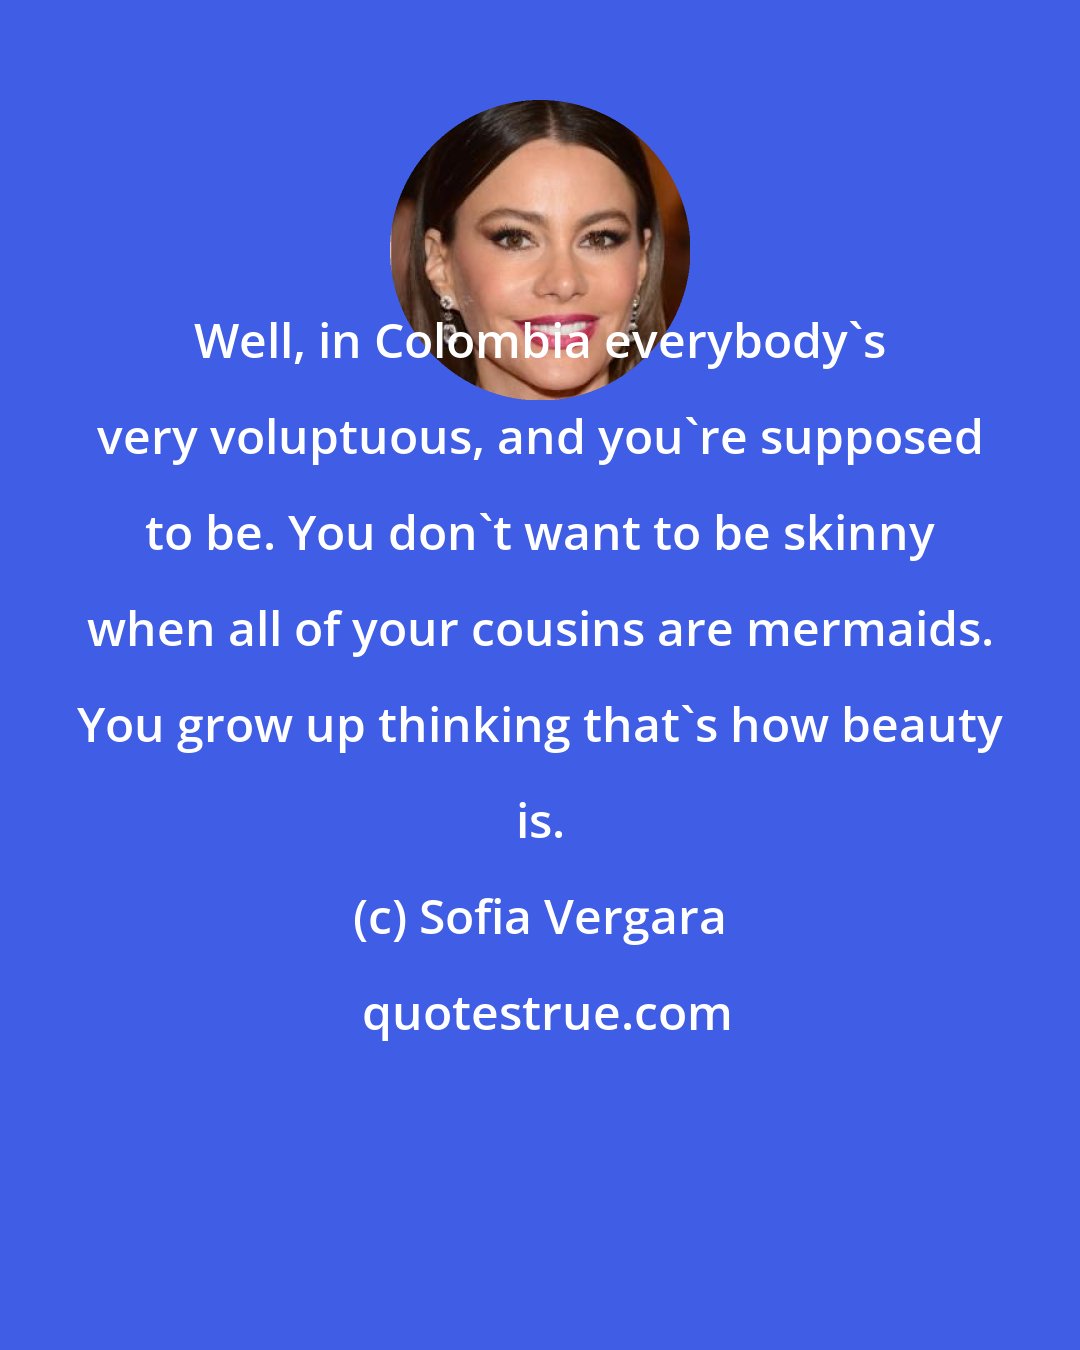 Sofia Vergara: Well, in Colombia everybody's very voluptuous, and you're supposed to be. You don't want to be skinny when all of your cousins are mermaids. You grow up thinking that's how beauty is.